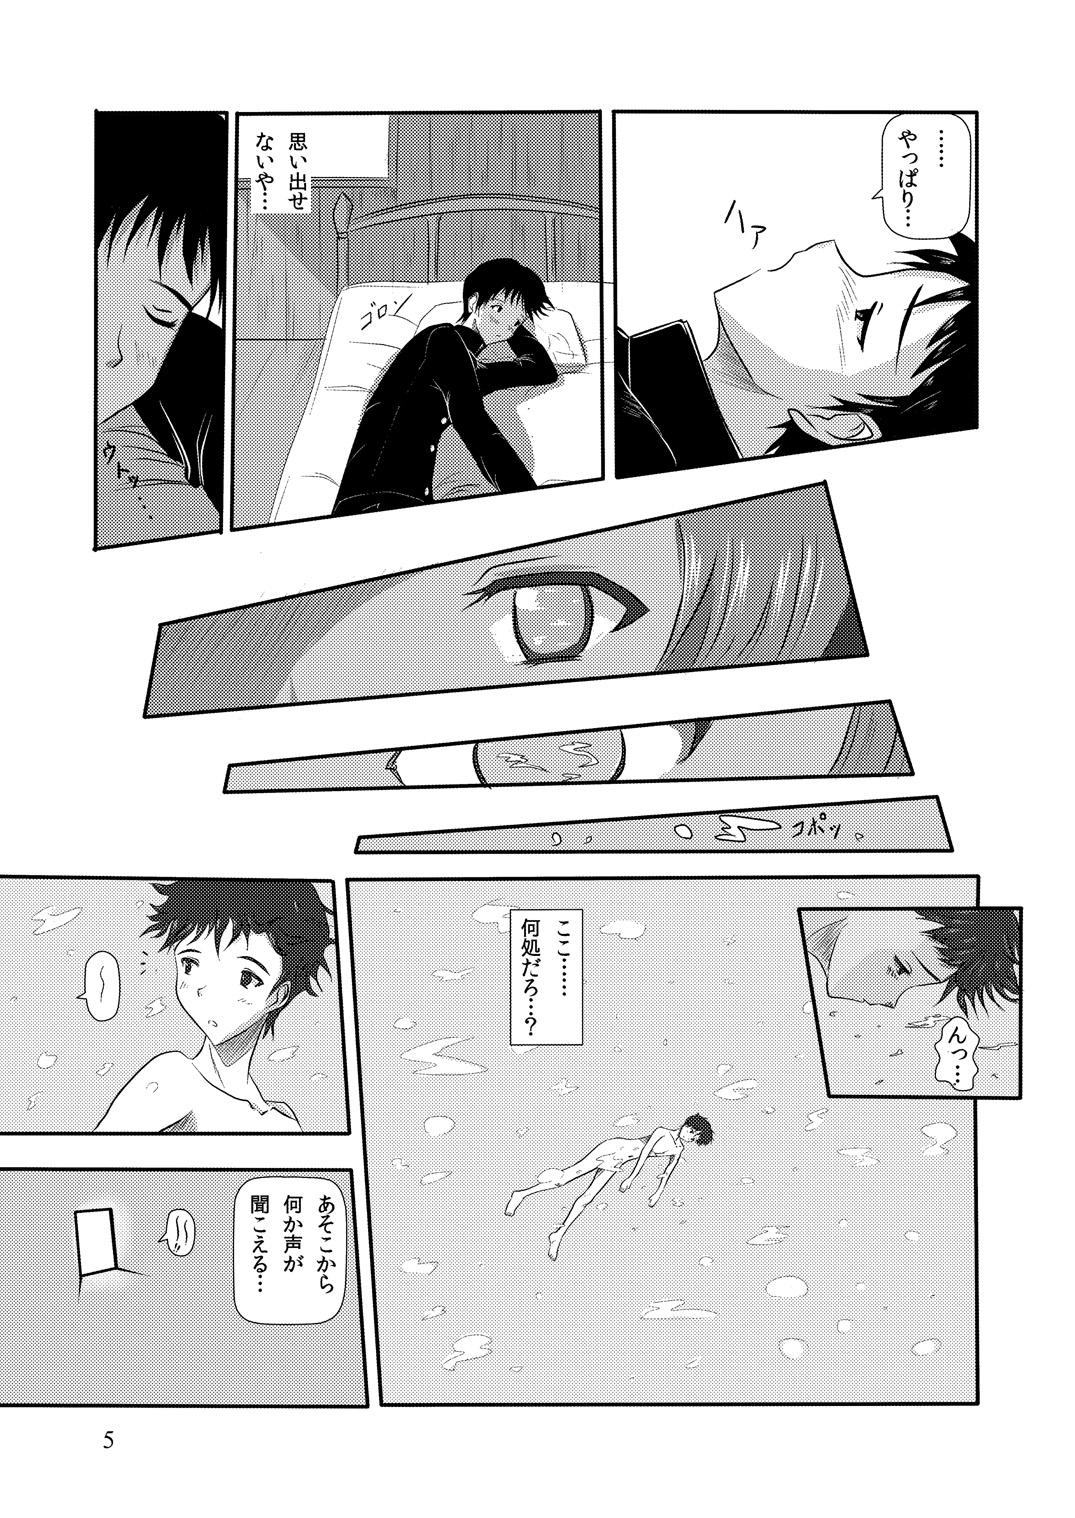 Best Blowjobs Yui Ikari 10th Anniversary Book - beyond the time - Neon genesis evangelion Point Of View - Page 6